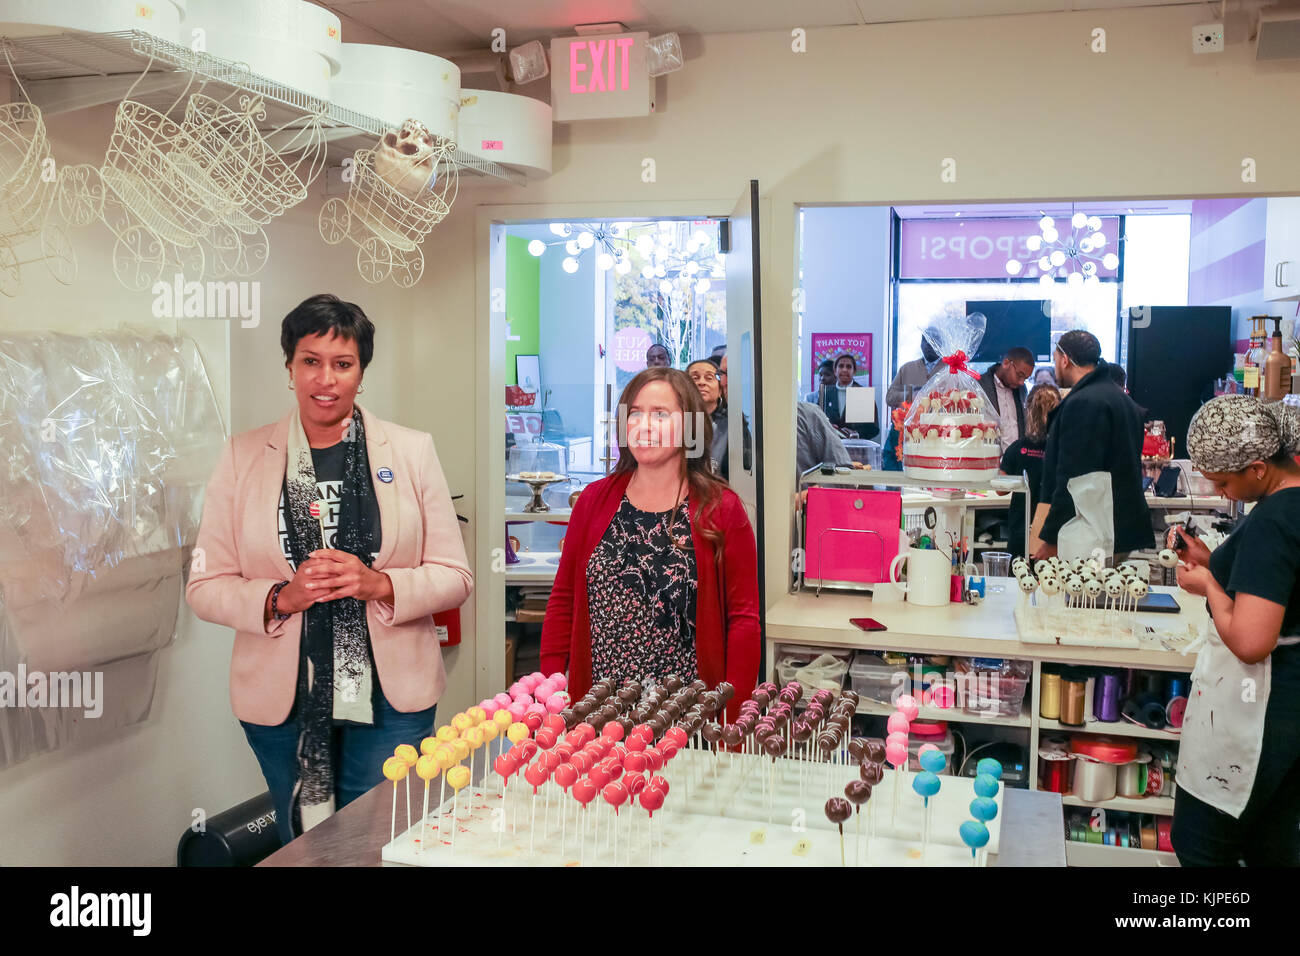 Washington, United States. 25th Nov, 2017. Washington, DC Mayor Muriel Bowser visits the small business, Baked by Yael, a bakery, in the Northwest section of D.C., on Small Business Saturday Credit: Joseph Gruber/Alamy Live News Stock Photo